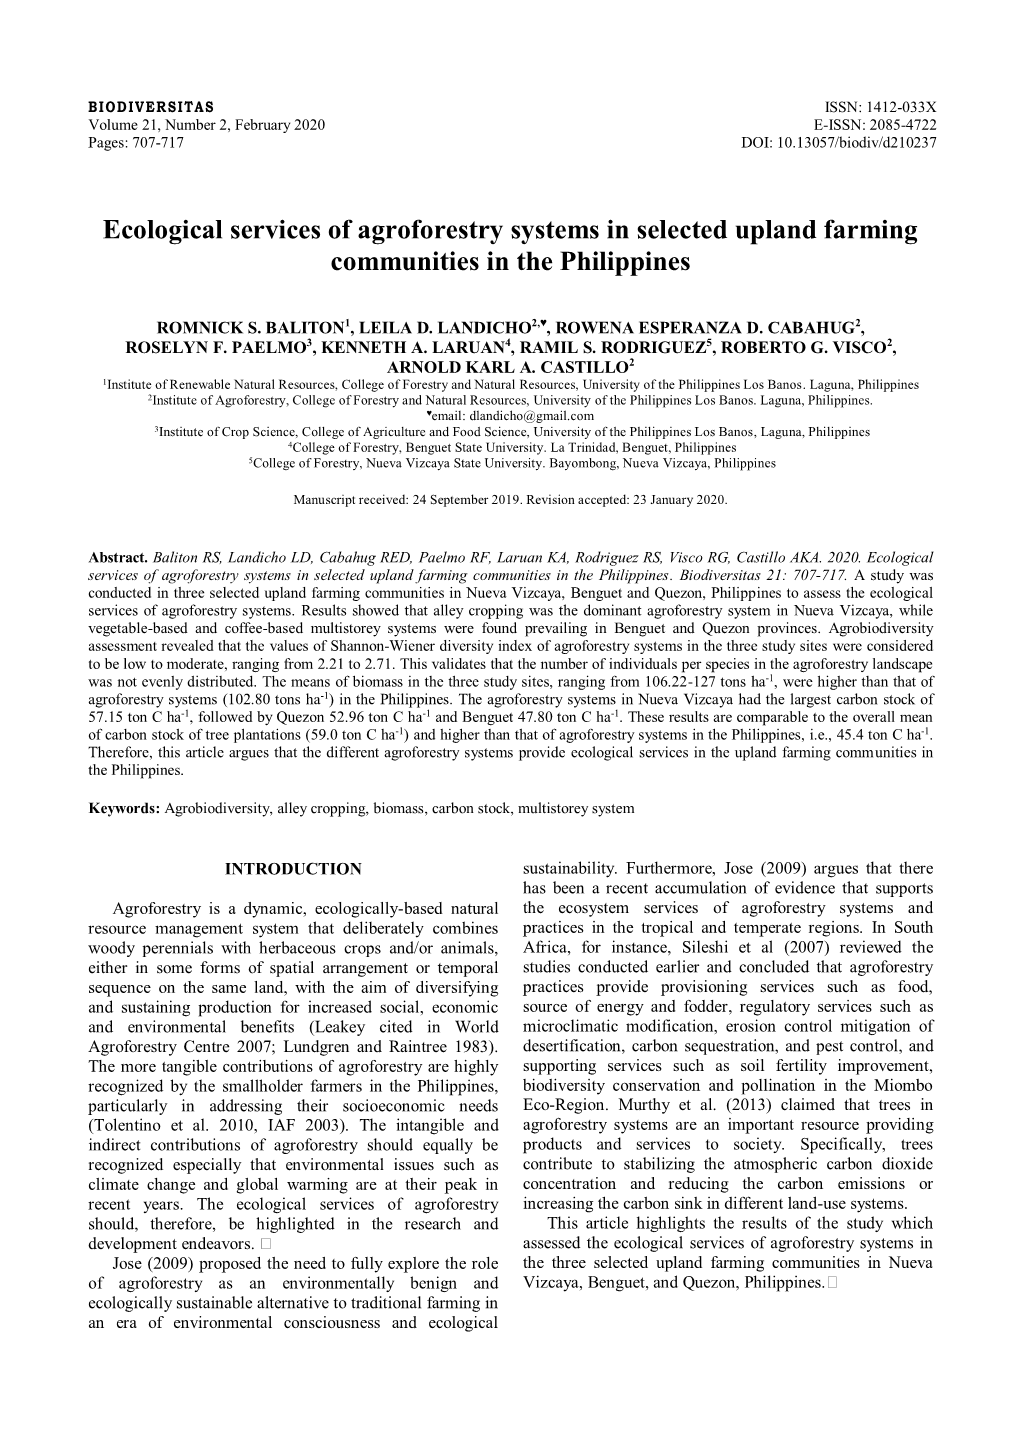 Ecological Services of Agroforestry Systems in Selected Upland Farming Communities in the Philippines